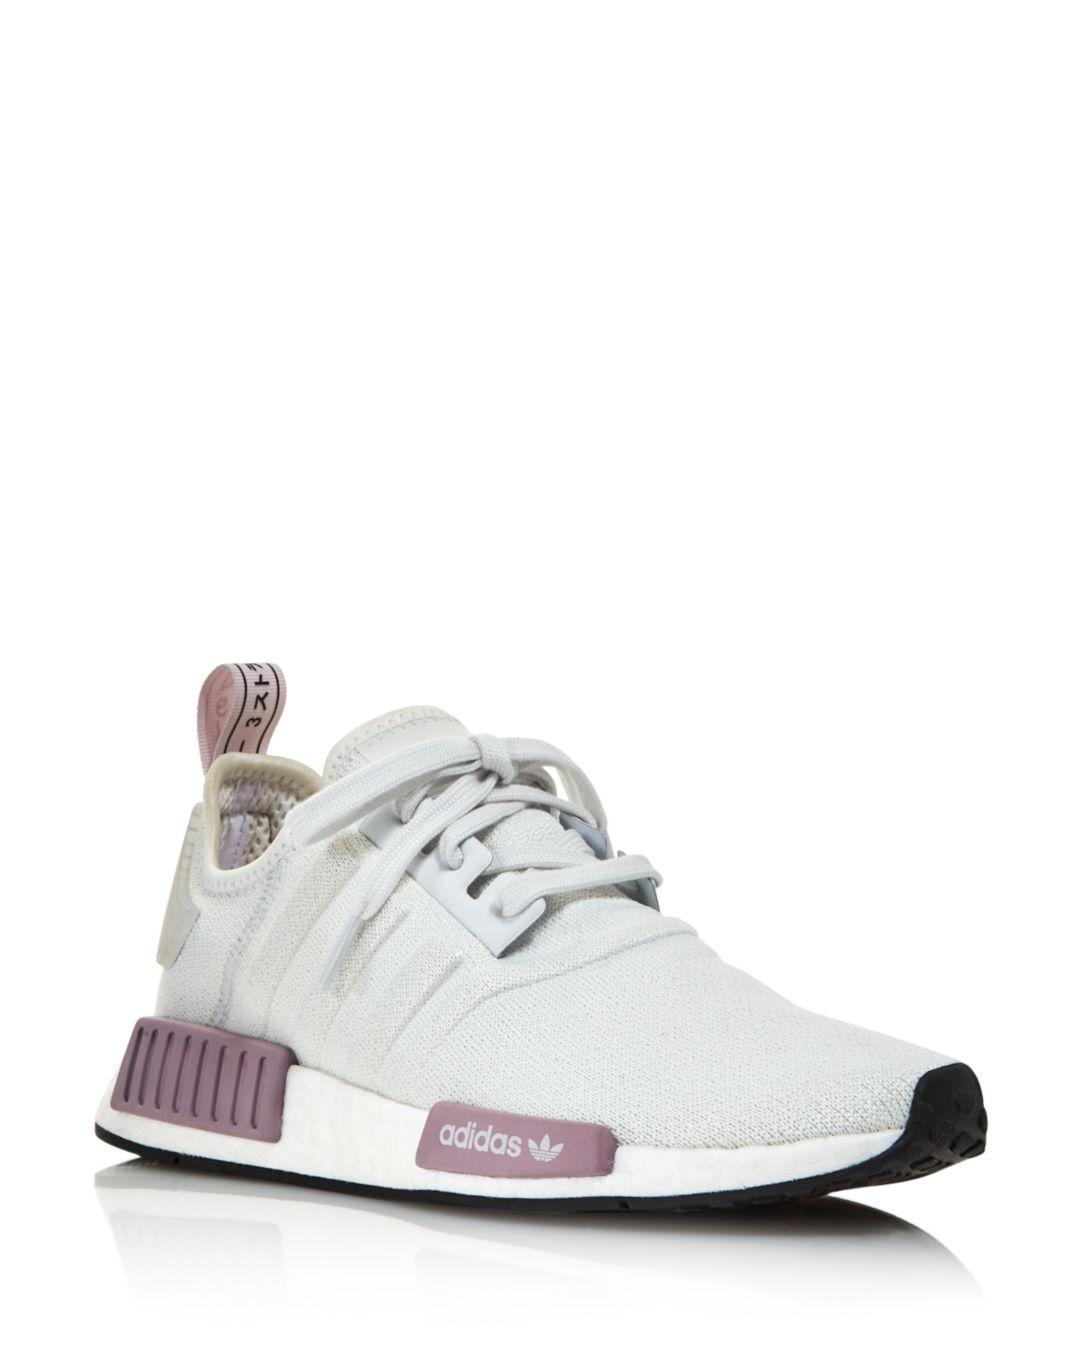 adidas Women's Nmd R1 Knit Lace Up Sneakers in Gray | Lyst